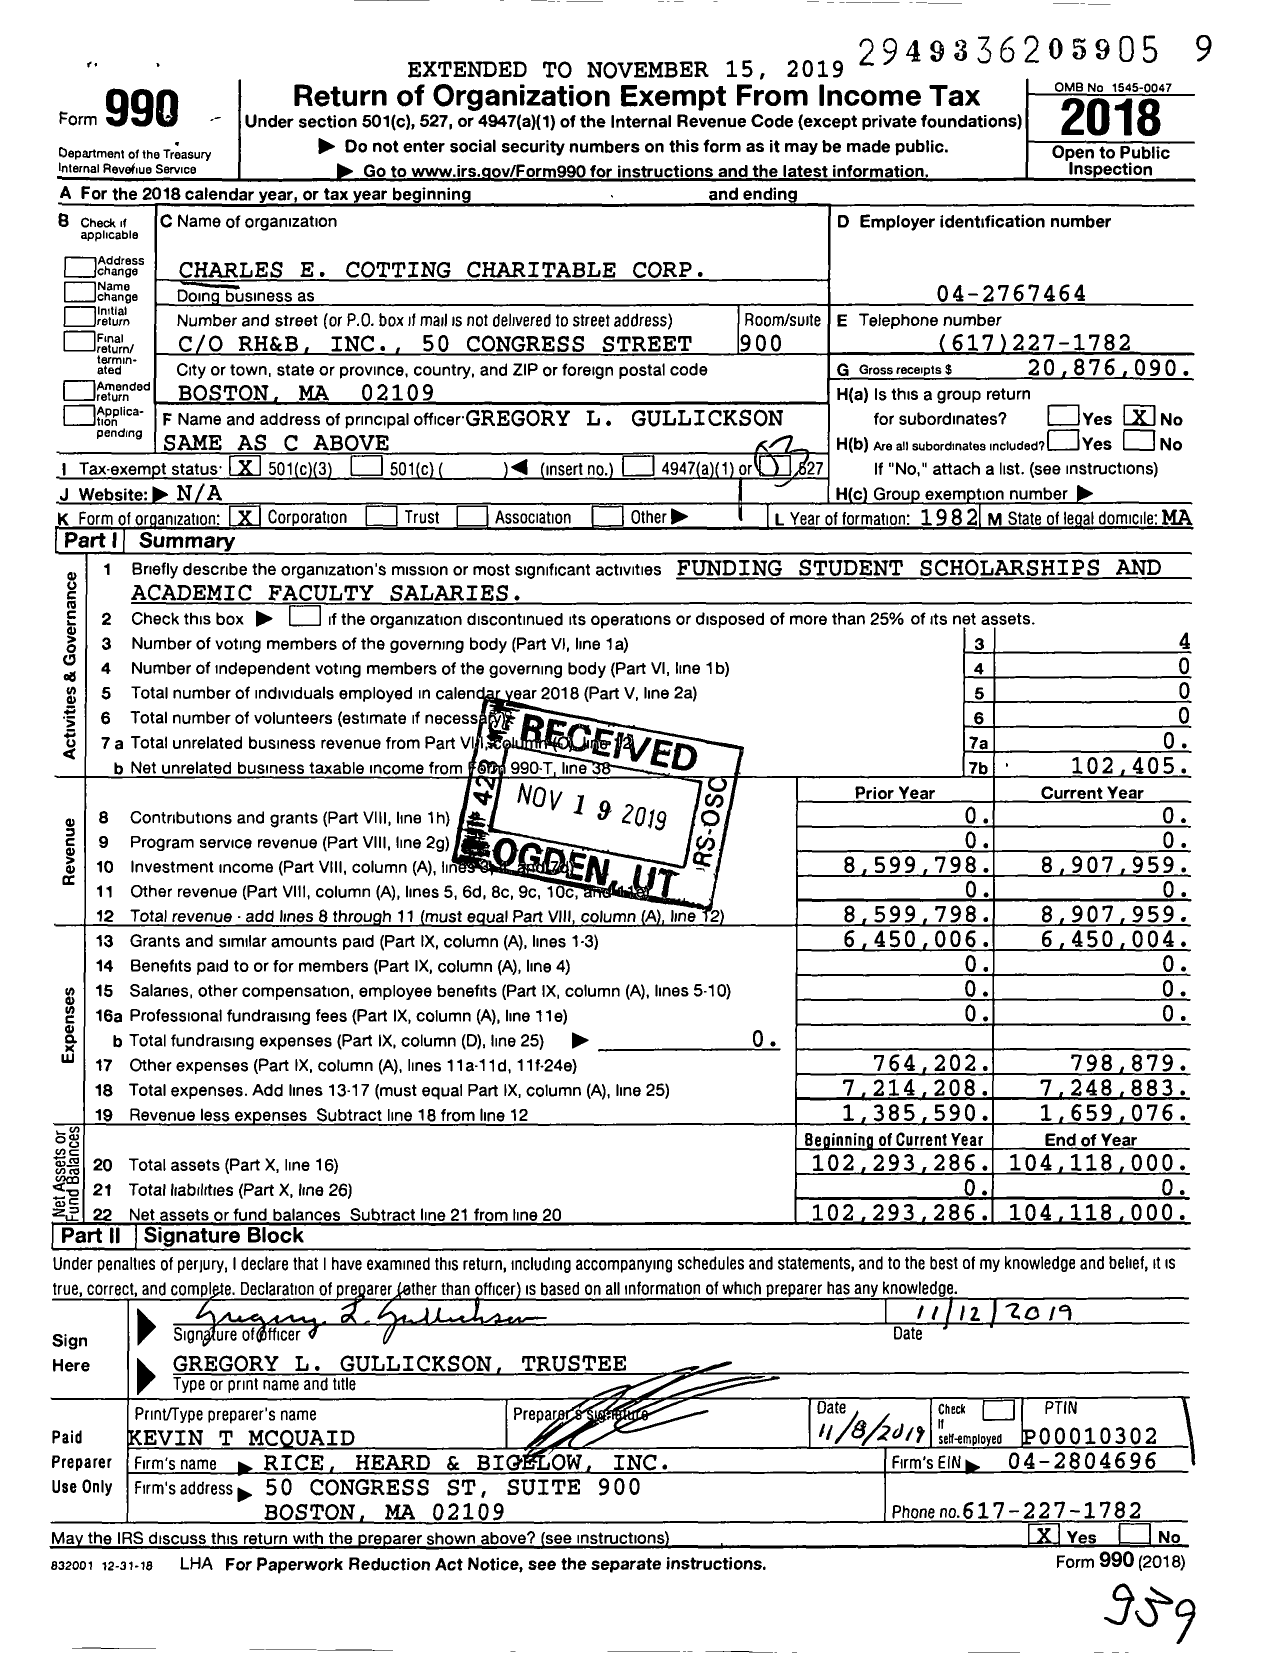 Image of first page of 2018 Form 990 for Charles E. Cotting Charitable Corporation